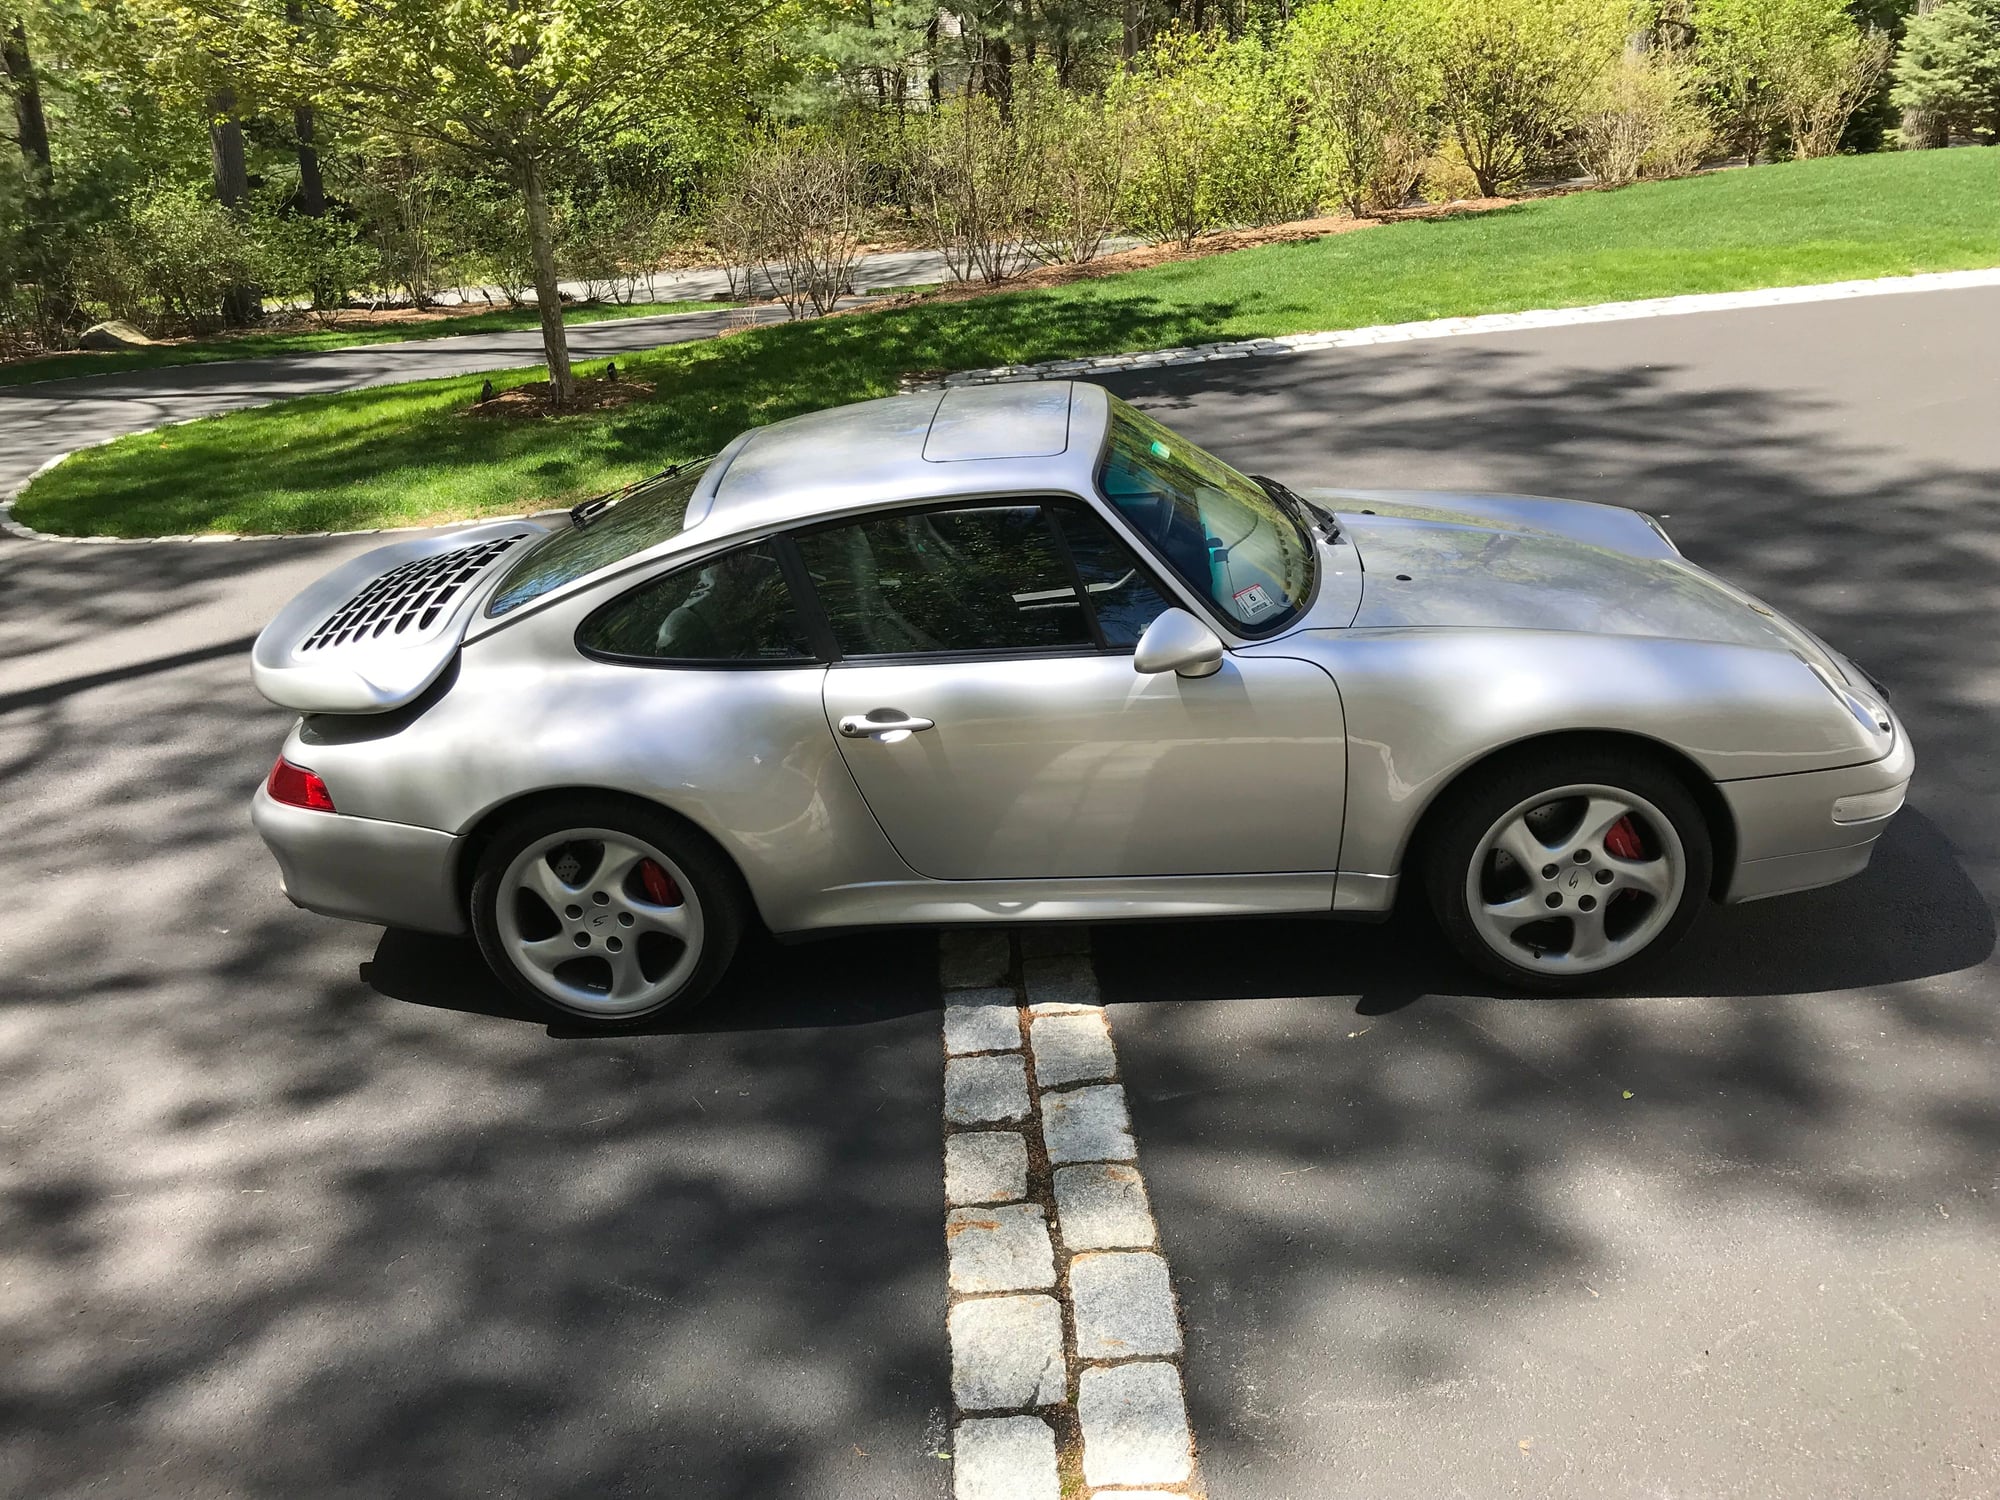 1997 Porsche 911 - 1997 993 C4S wide-body Porsche - Used - VIN wp0aa299iv5321443 - 48,760 Miles - 6 cyl - AWD - Manual - Coupe - Silver - Wellesley, MA 02482, United States